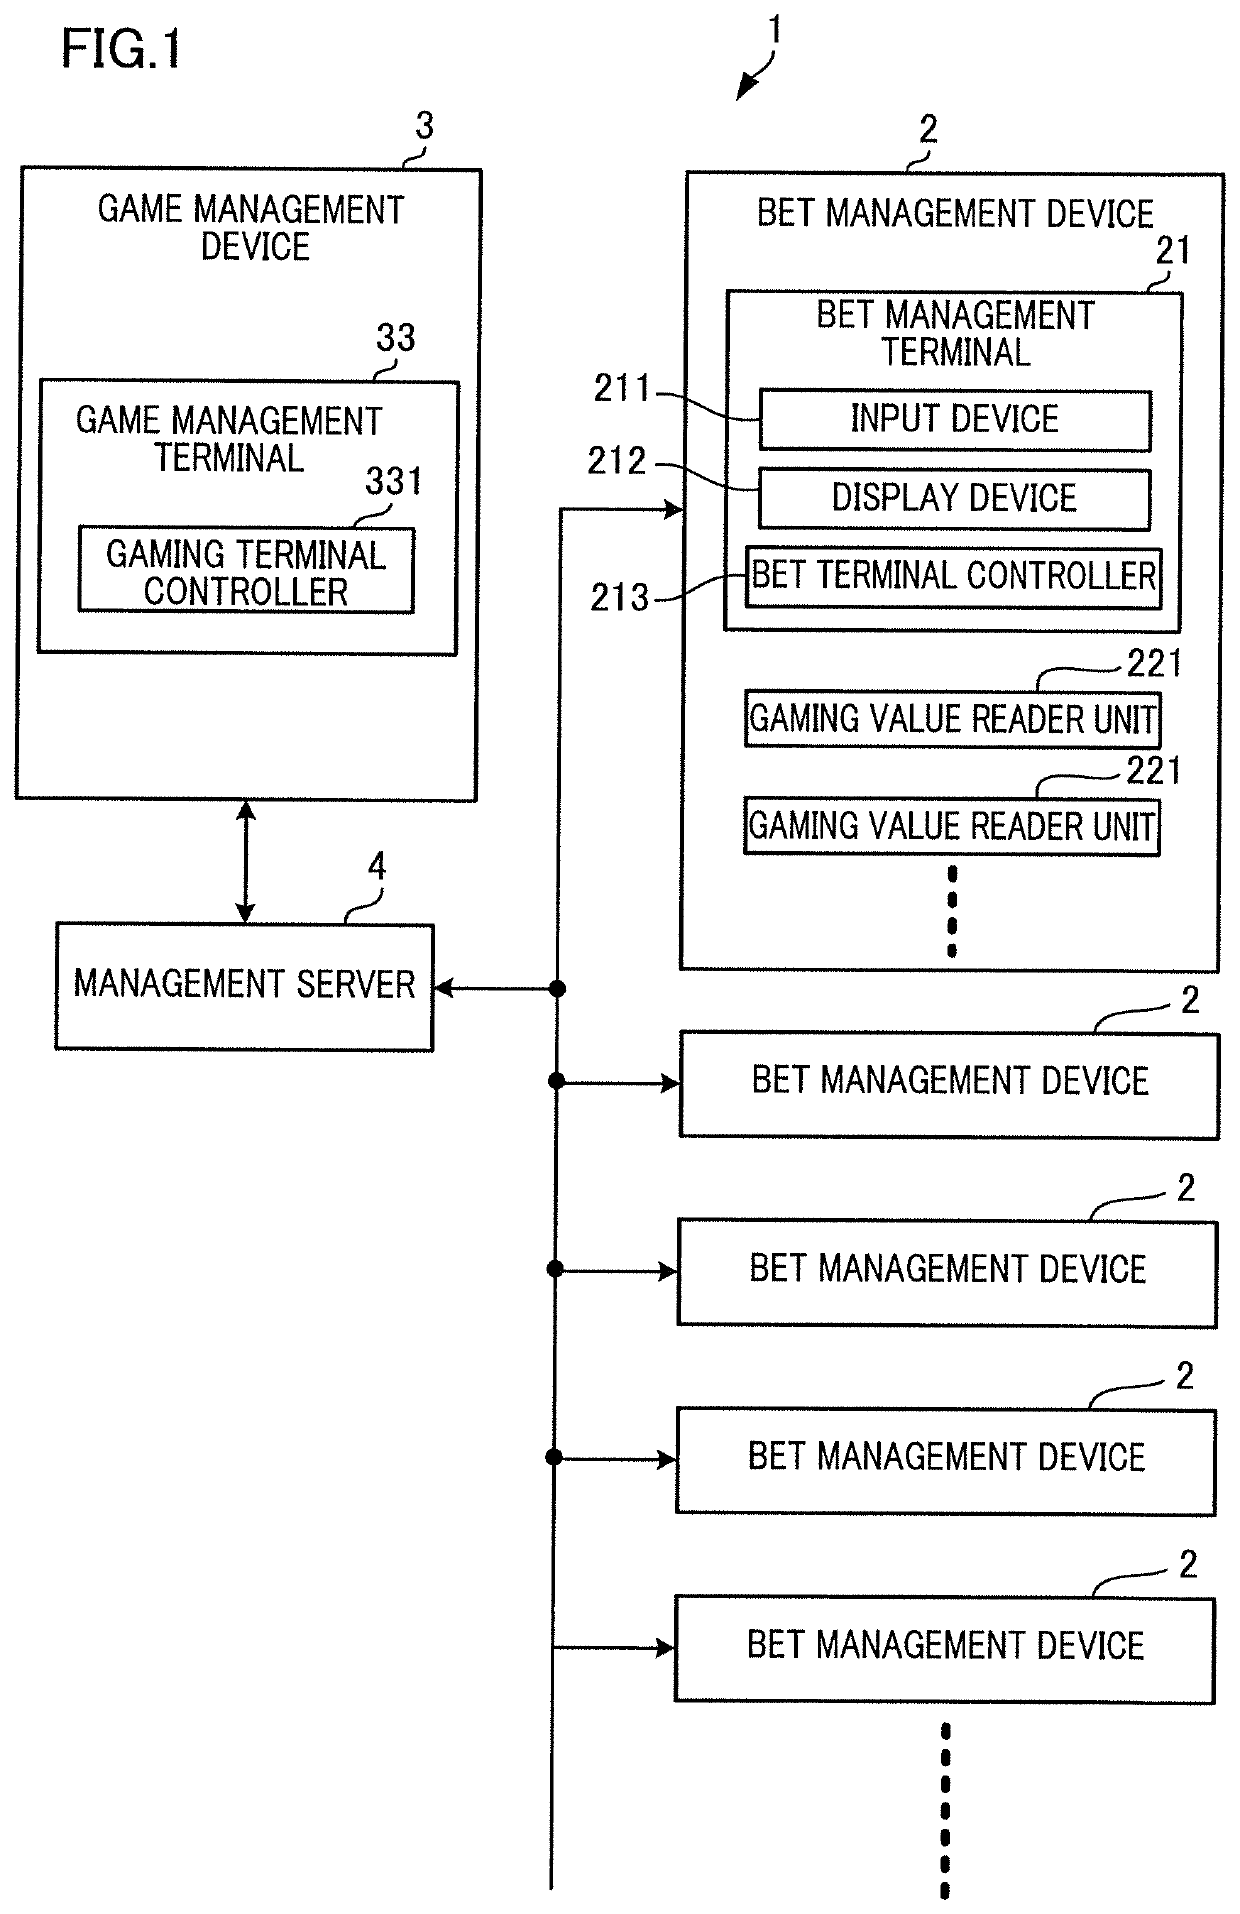 Game system and bet management device